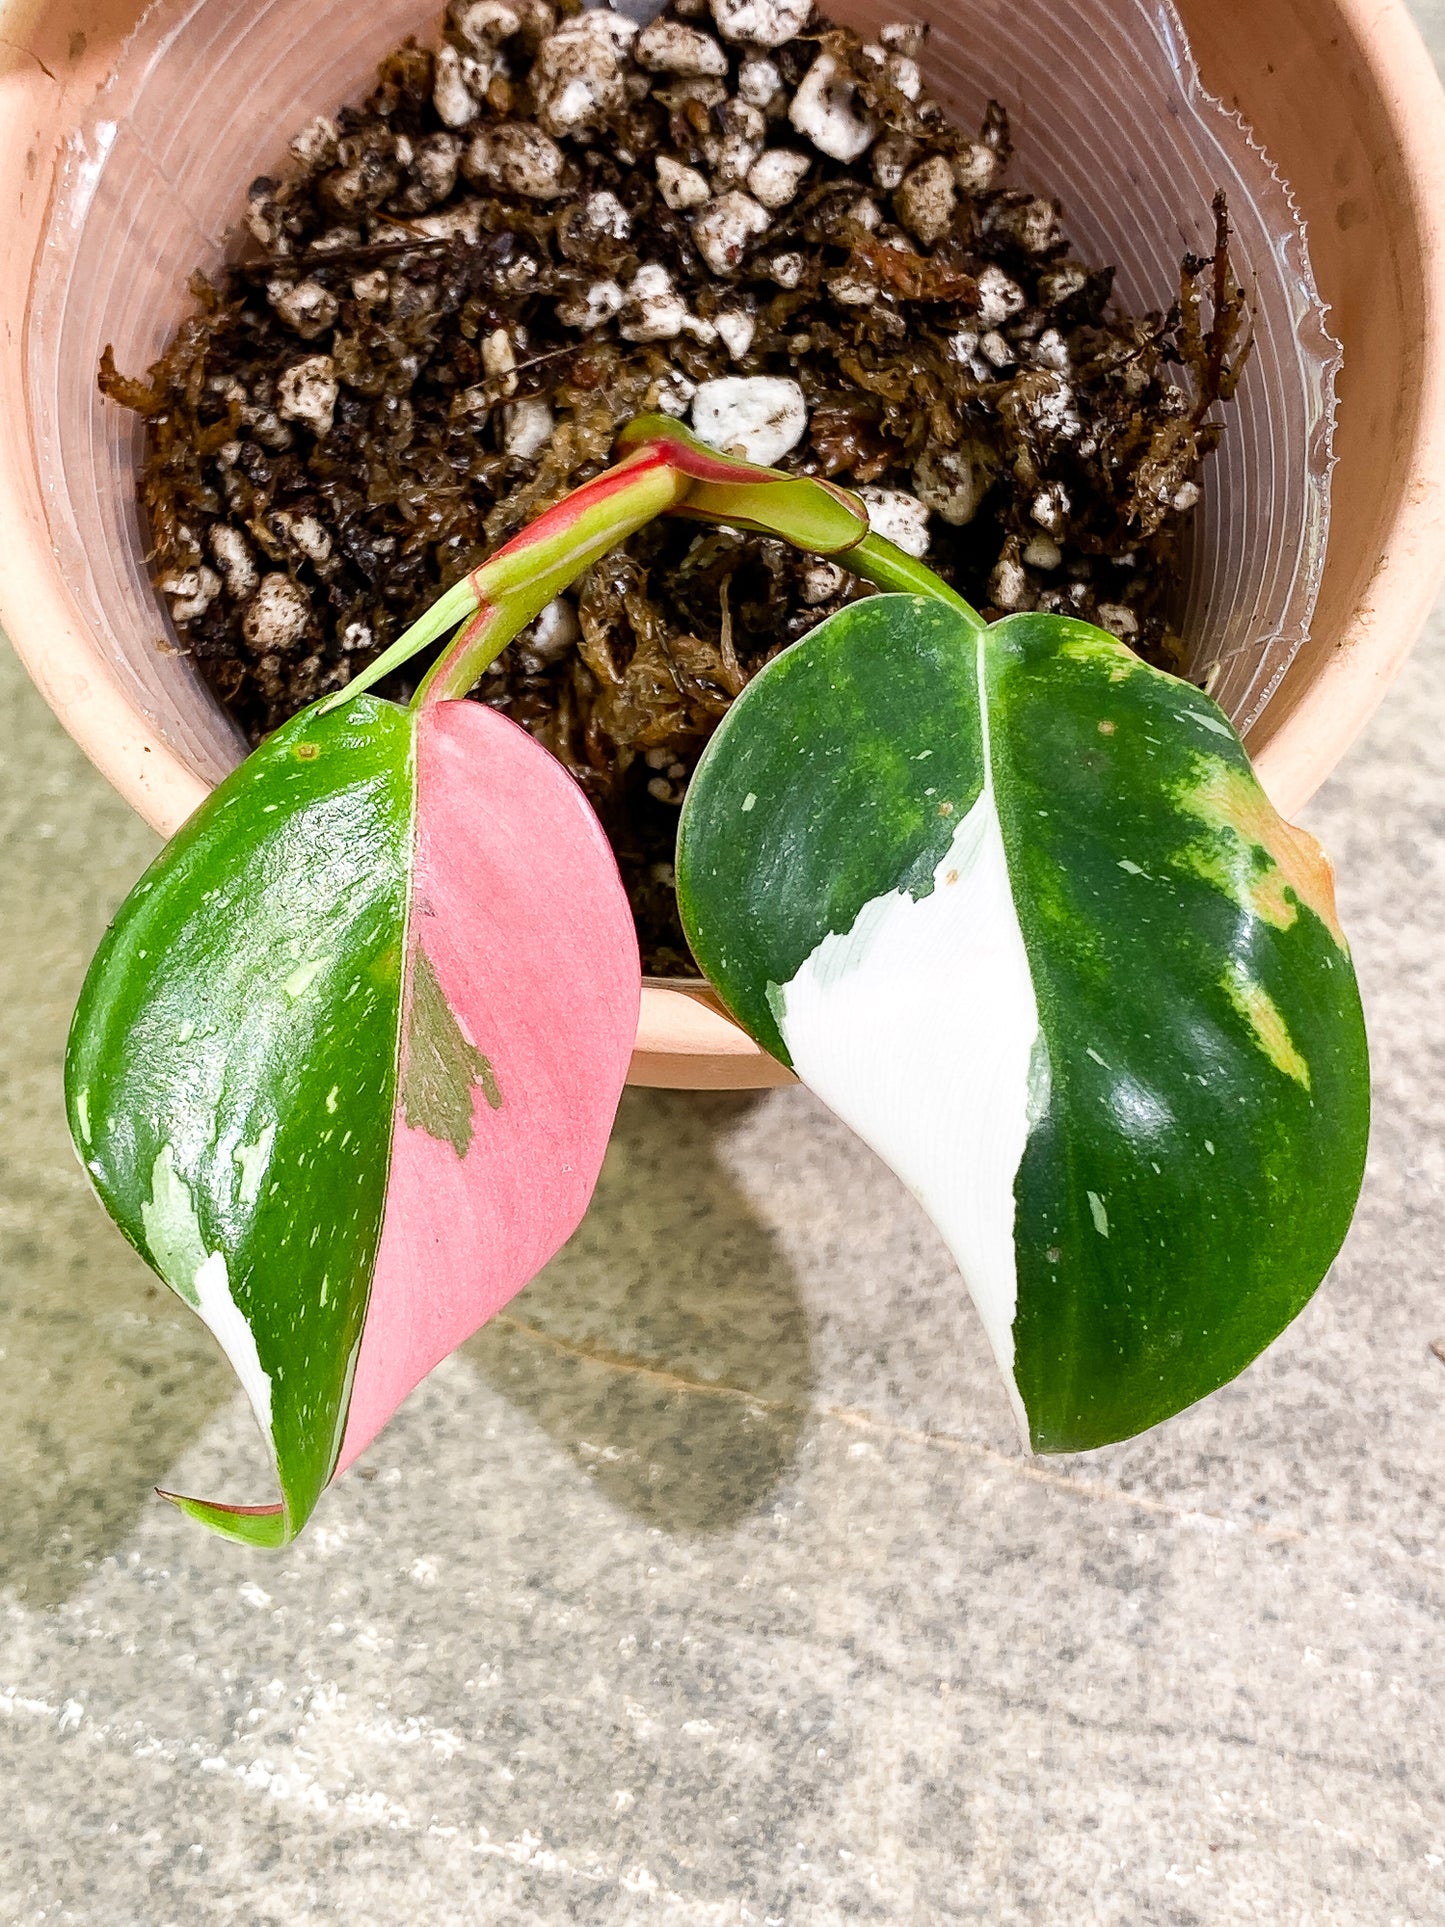 Philodendron white princess tricolor 2 leaves 1 sprout slightly rooted double node